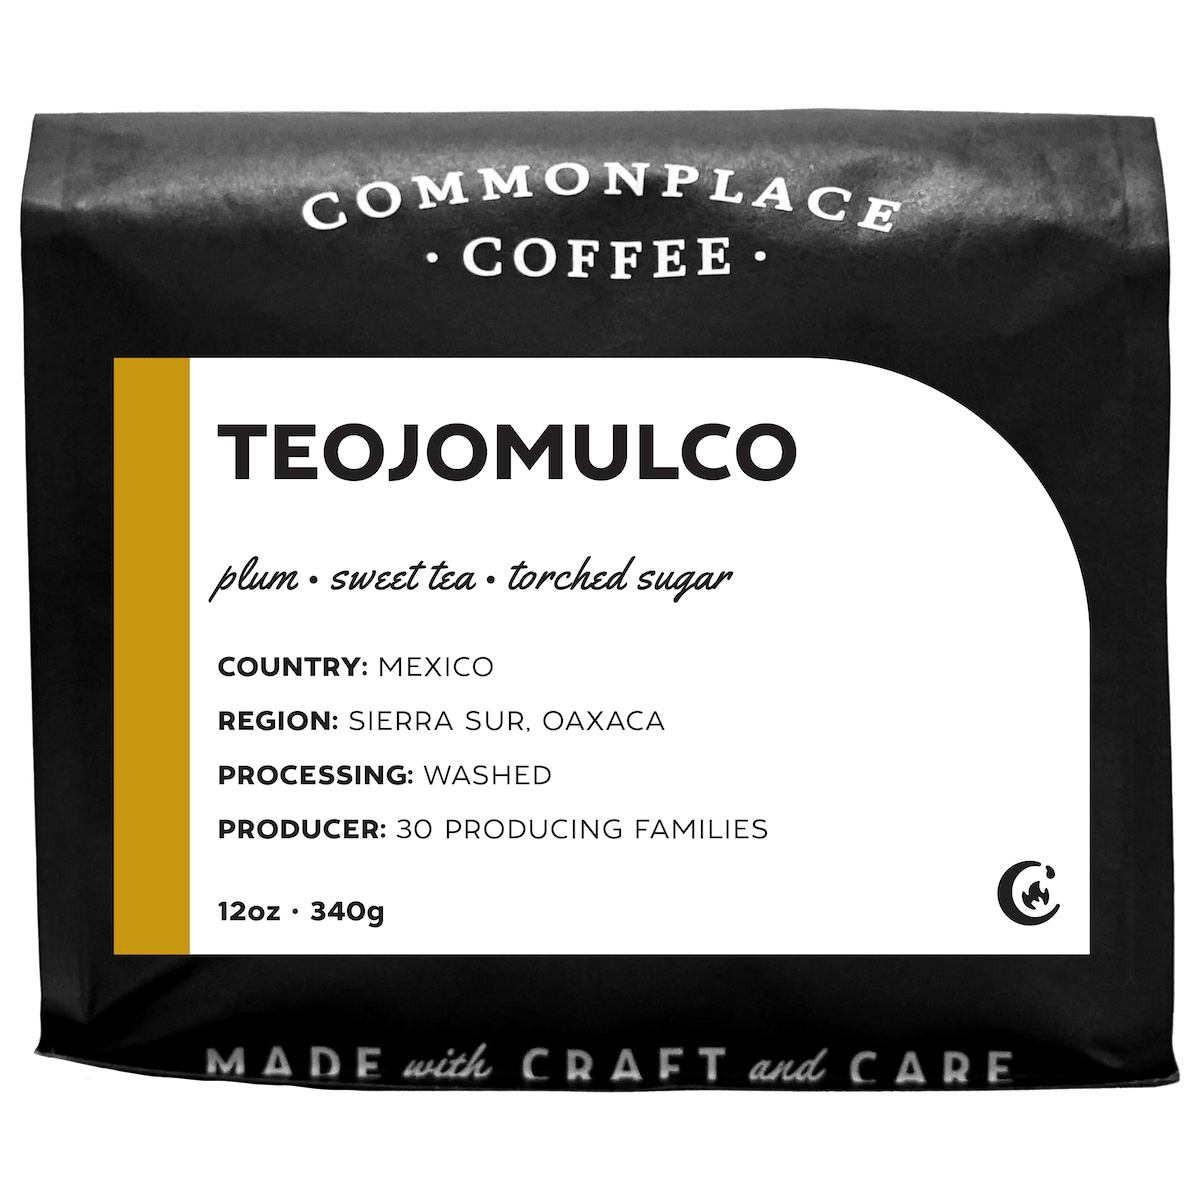 A 12oz matte black bag of Teojomulco coffee from Commonplace Coffee. 